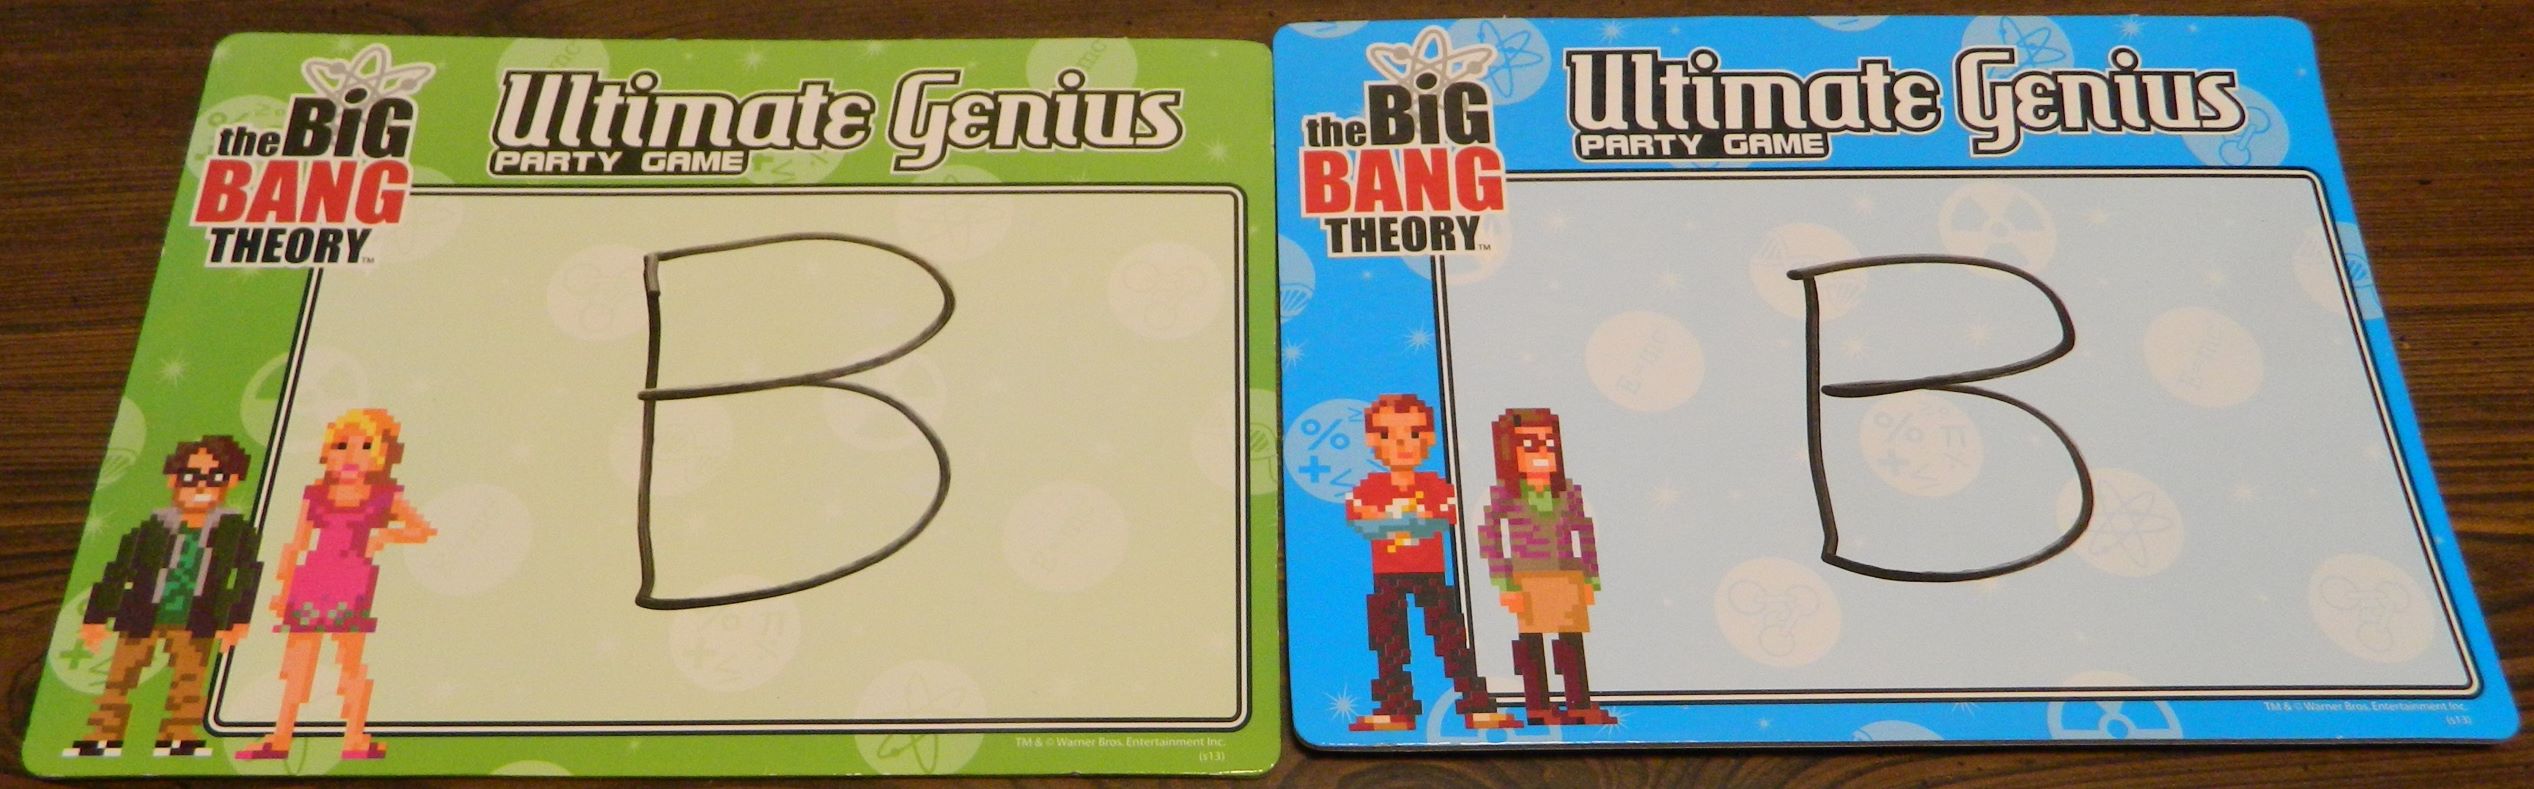 The Big Bang Theory Board Game Unterhaltung Spiele & Rätsel Brettspiele Spin Master Games Brettspiele Ultimate Genius Party Game 